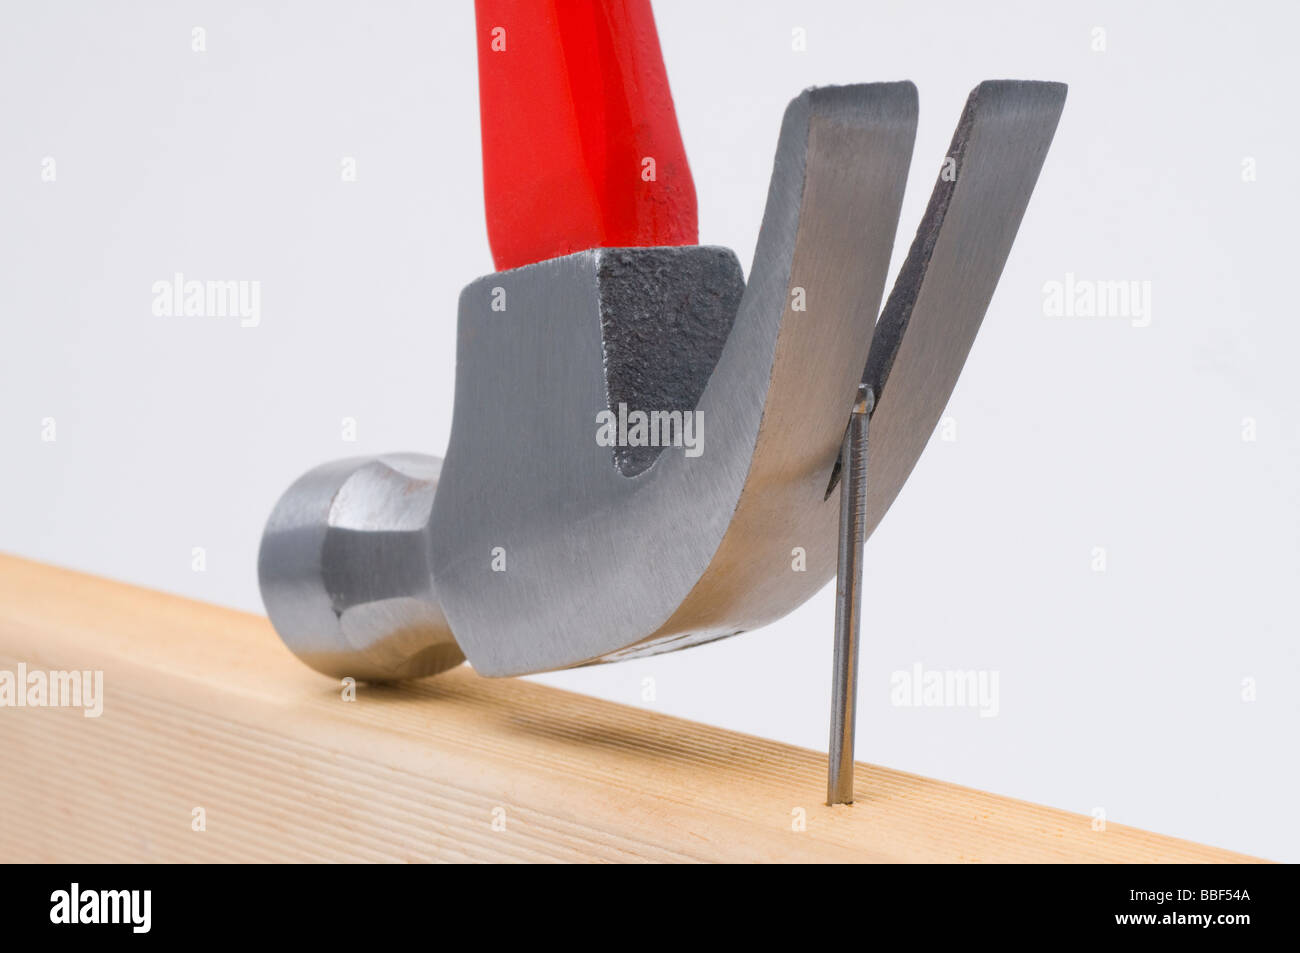 Using a claw hammer to remove a nail from timber Stock Photo